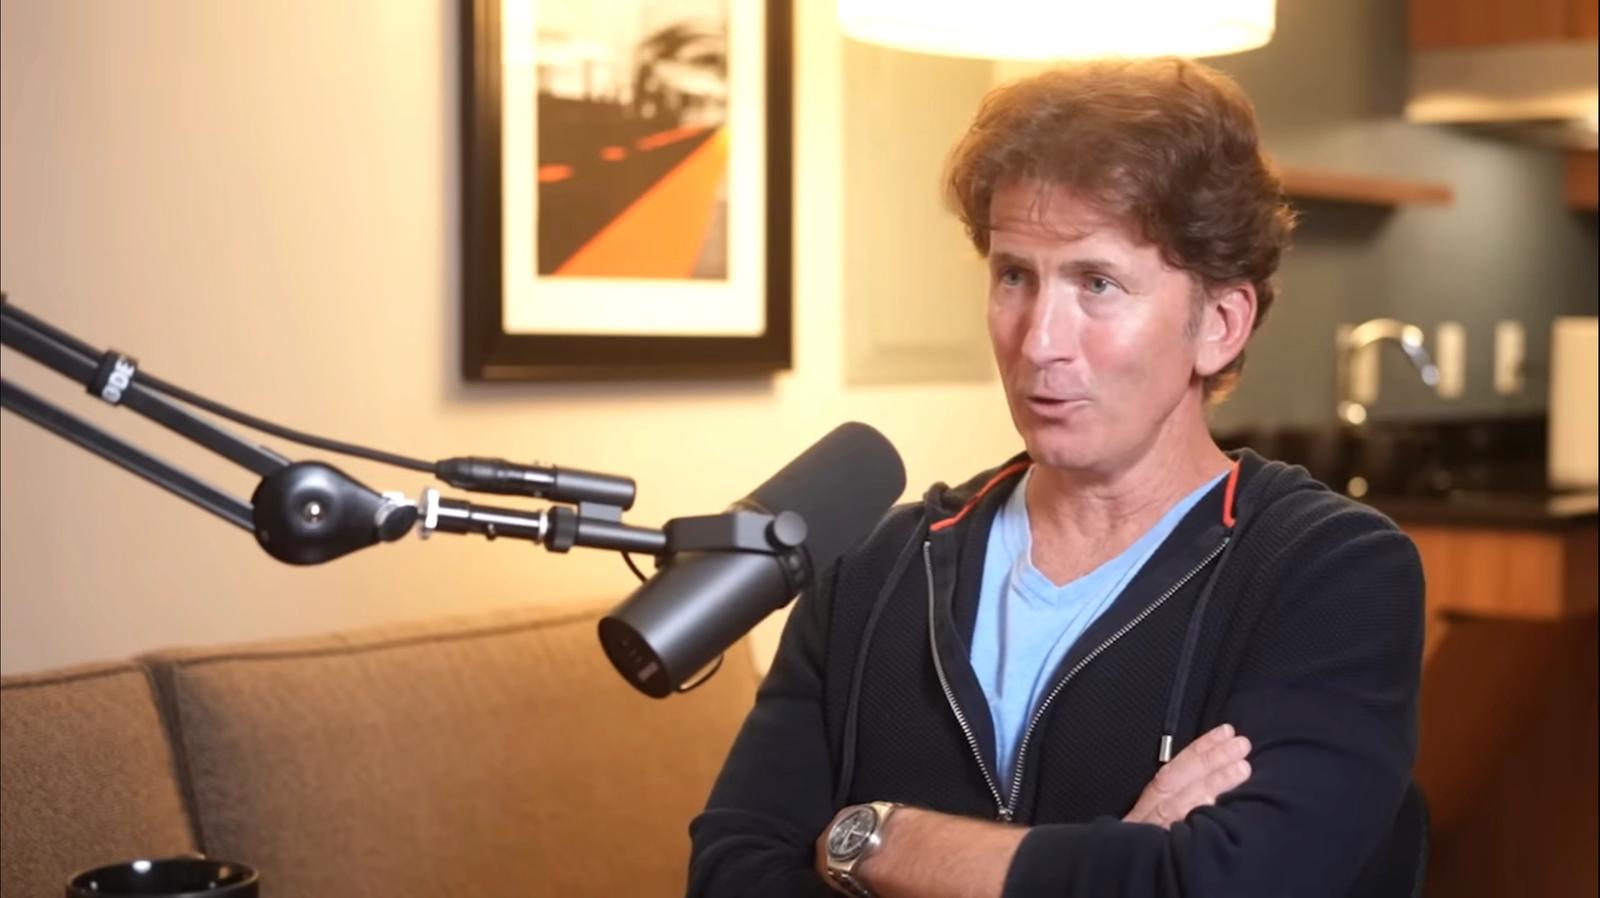 Todd Howard is being interviewed